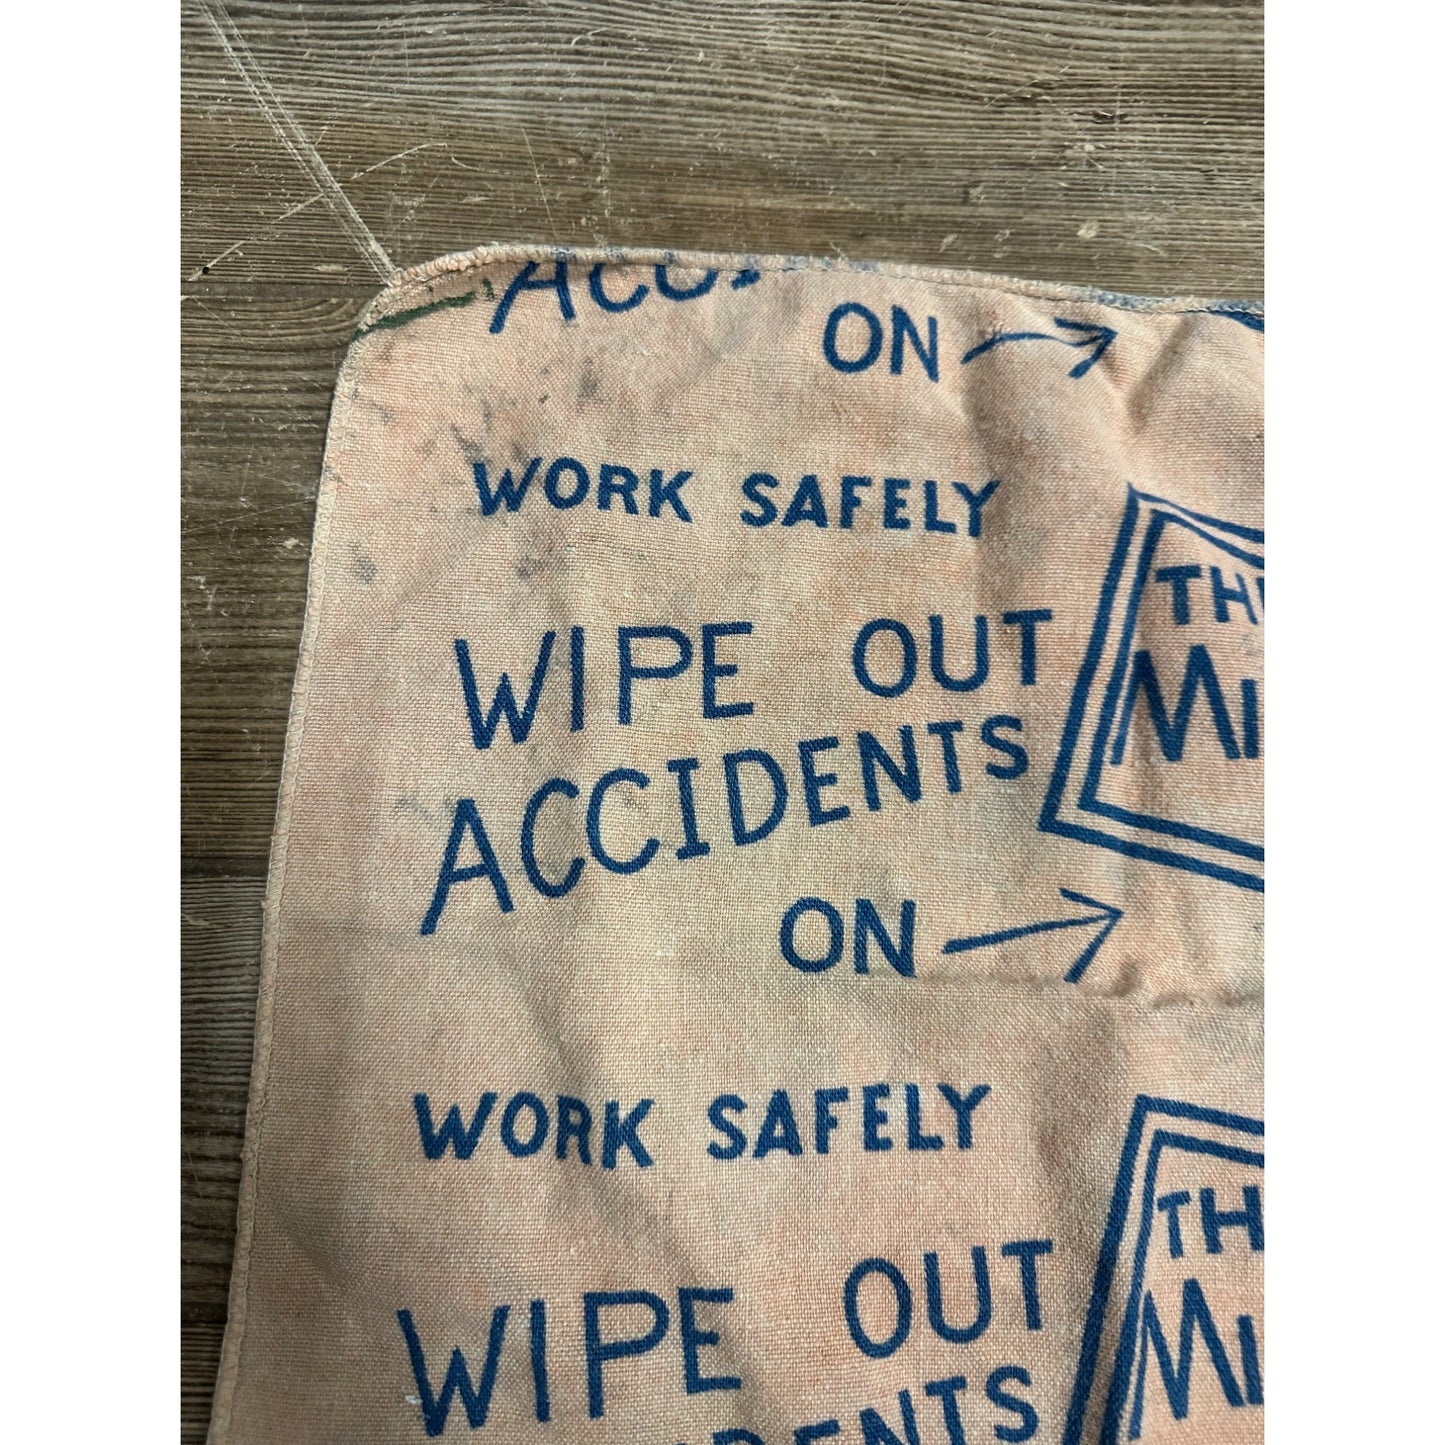 VINTAGE MILWAUKEE ROAD WIPE OUT ACCIDENTS TOWEL APPROX. 14"X15" RAG